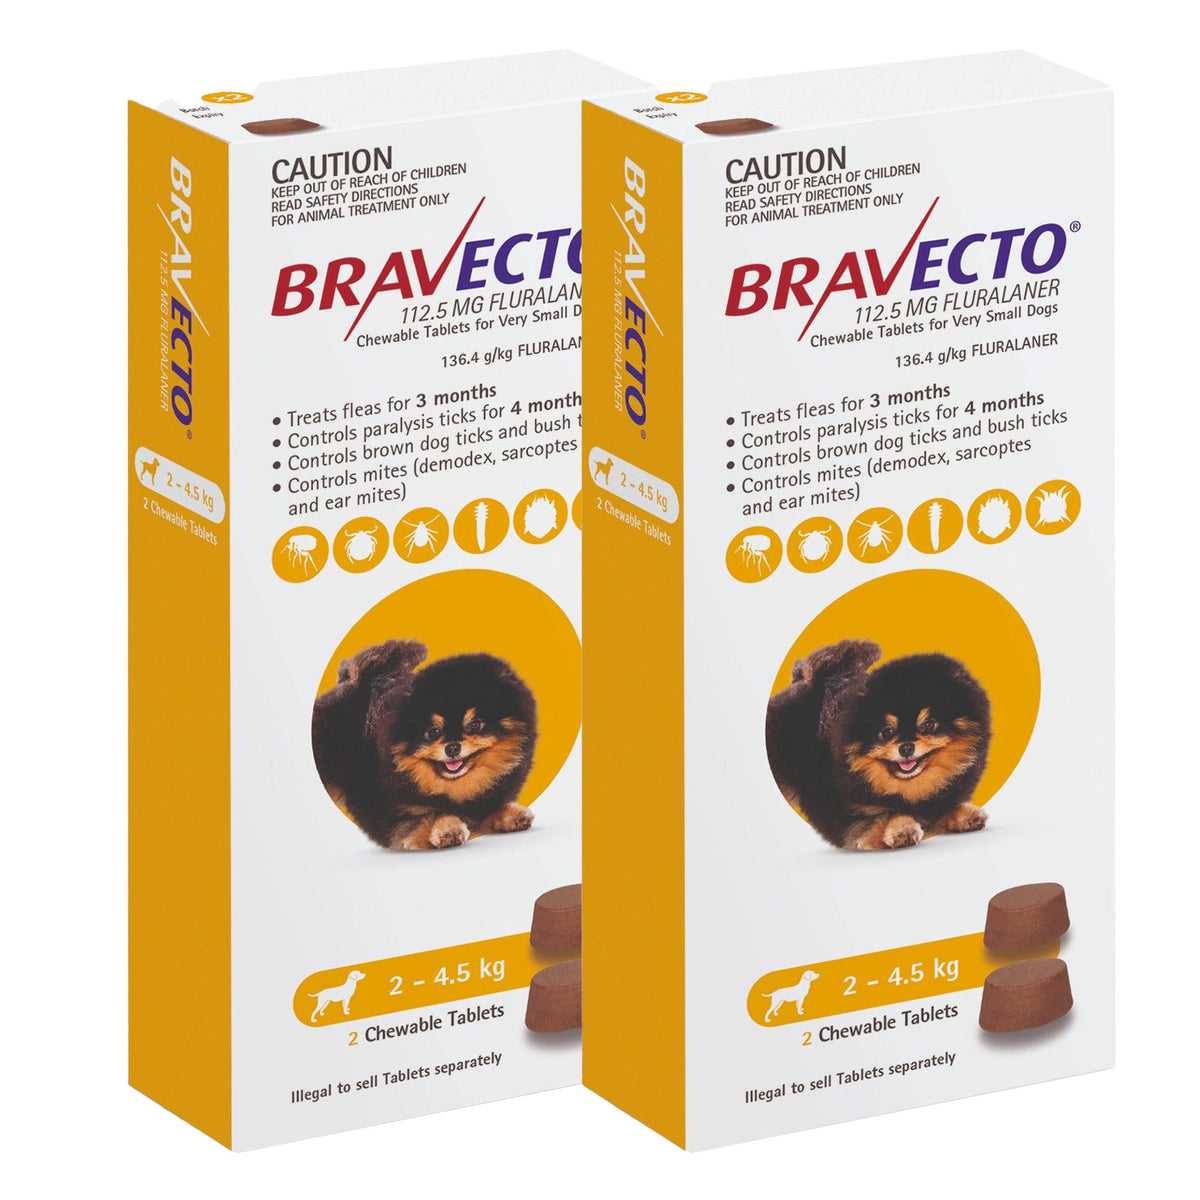 Bravecto 3-Month Chews for Very Small Dogs 2-4.5kg (Yellow) - 2 x 2 Chew Value Bundle